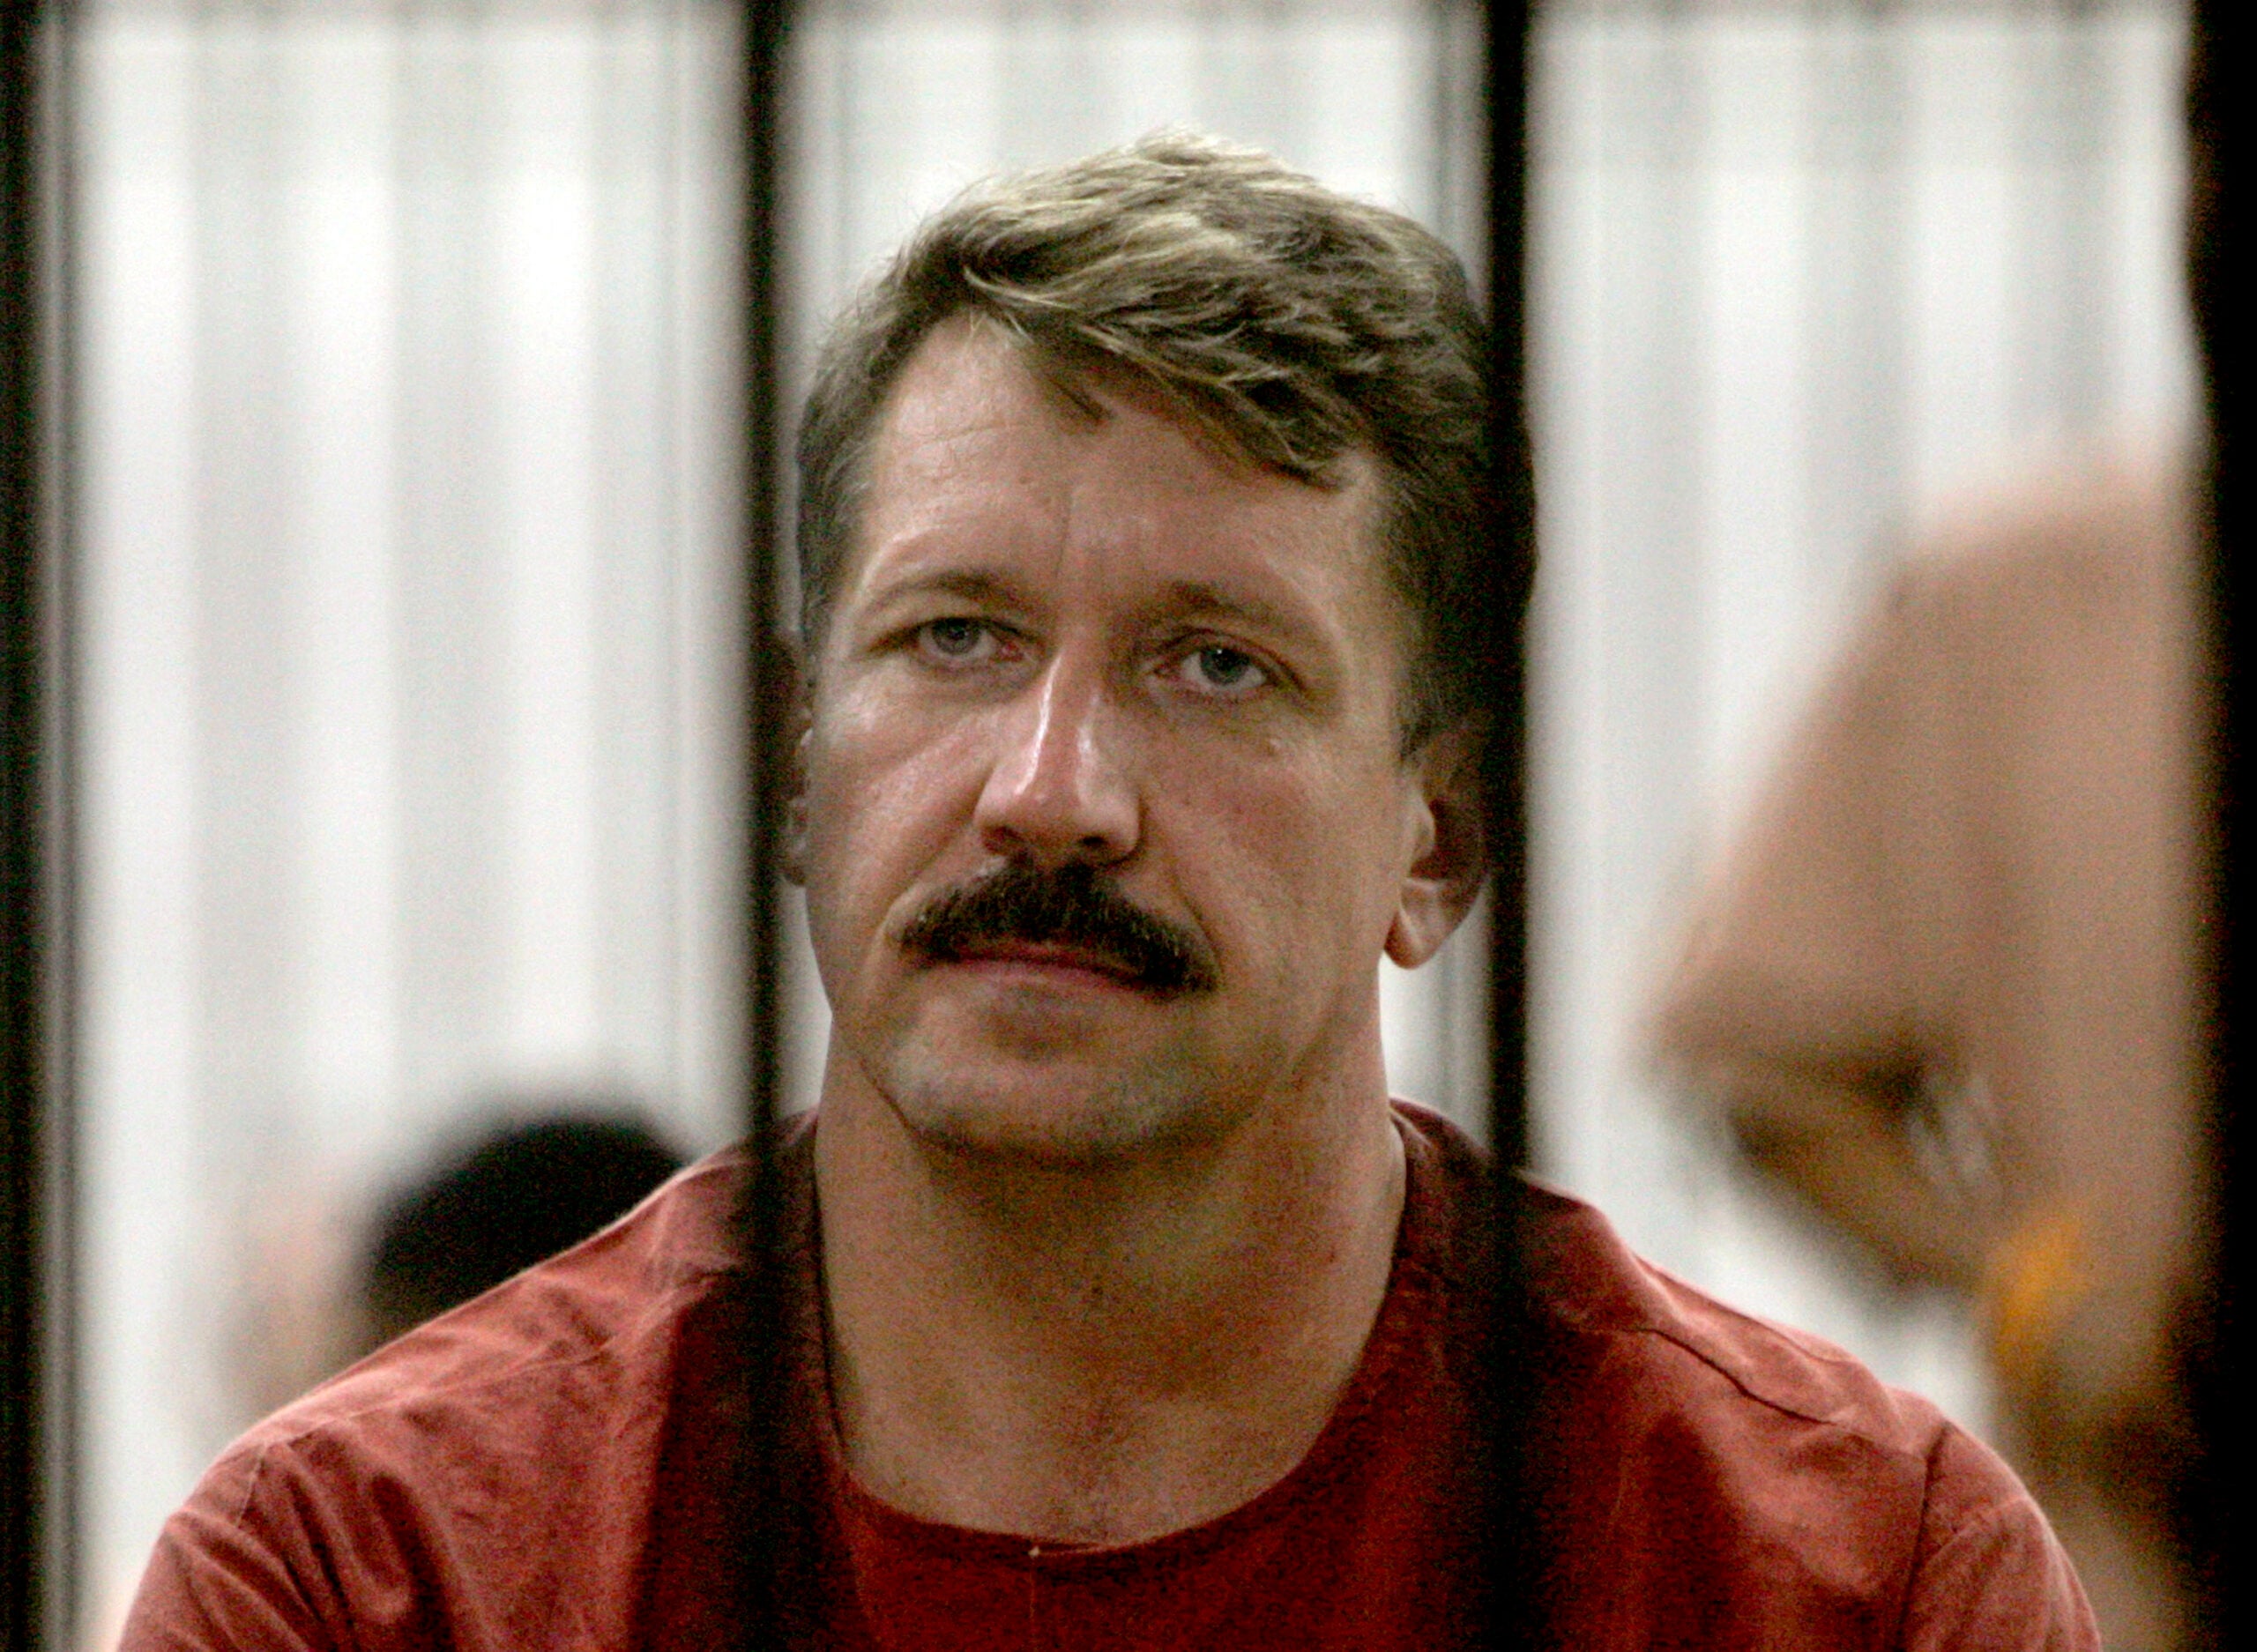 Viktor Bout looks out from inside a detention center while waiting for a hearing on his extradition to the United States on May 19, 2009, in Bangkok, Thailand.